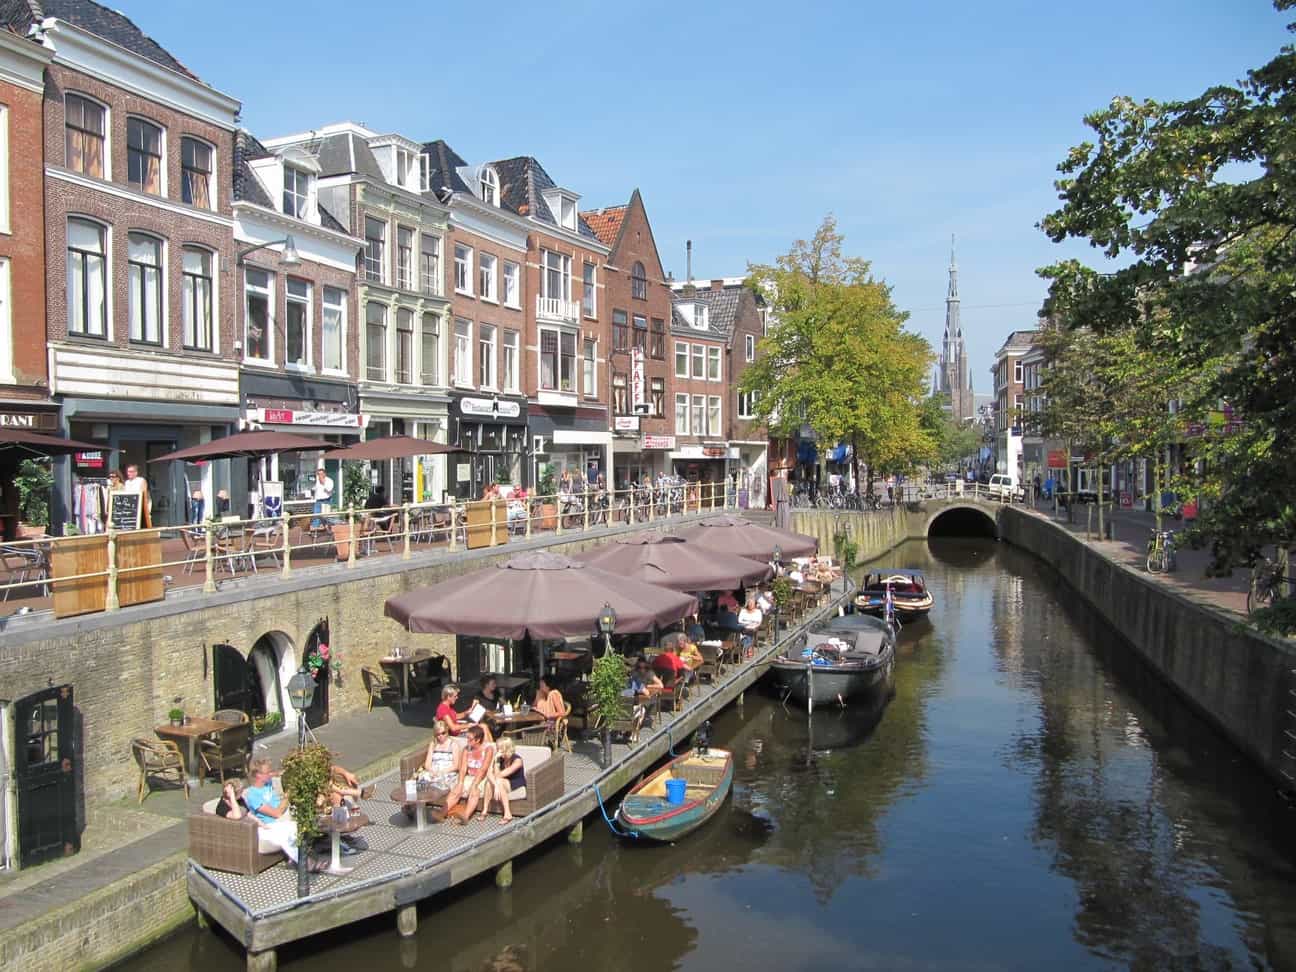 6 Things to Do When You Move to Leeuwarden | HousingAnywhere